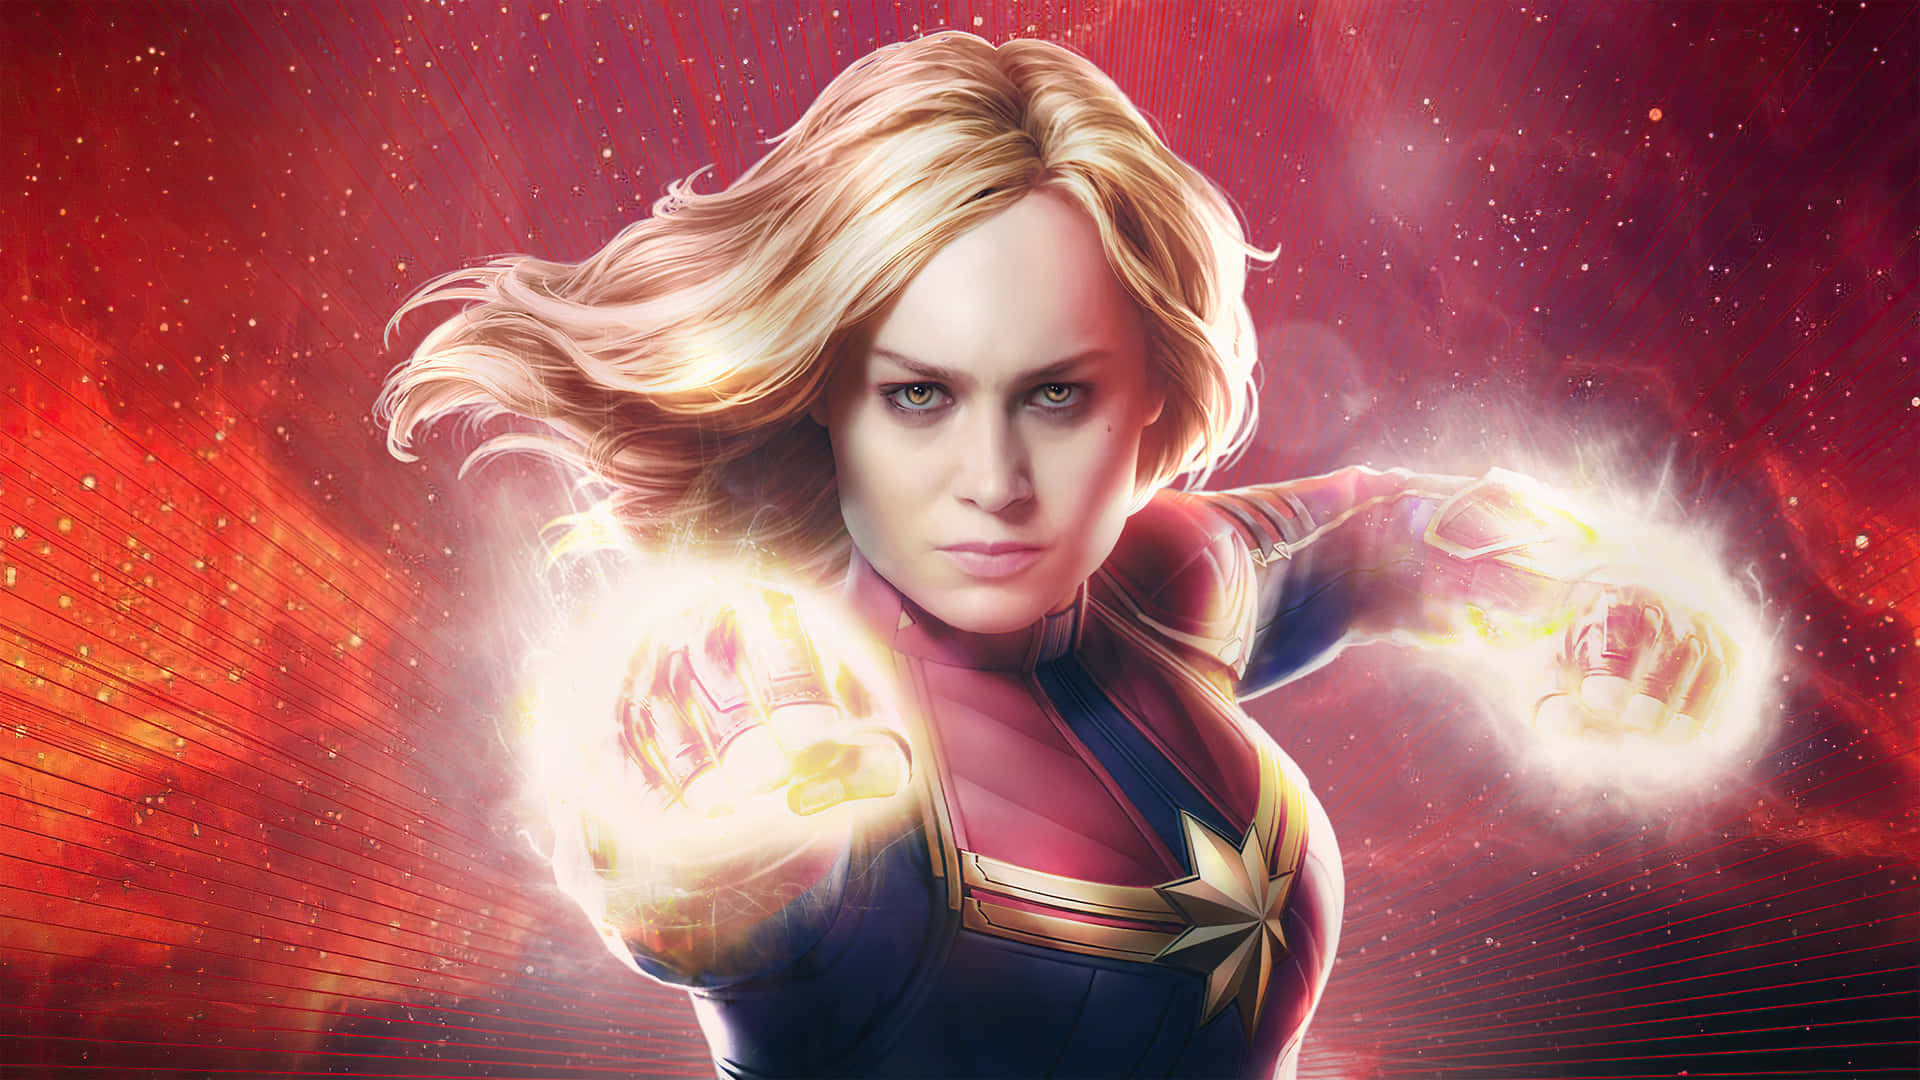 Brie Larson As Captain Marvel In Her High-definition Wallpapaer Background